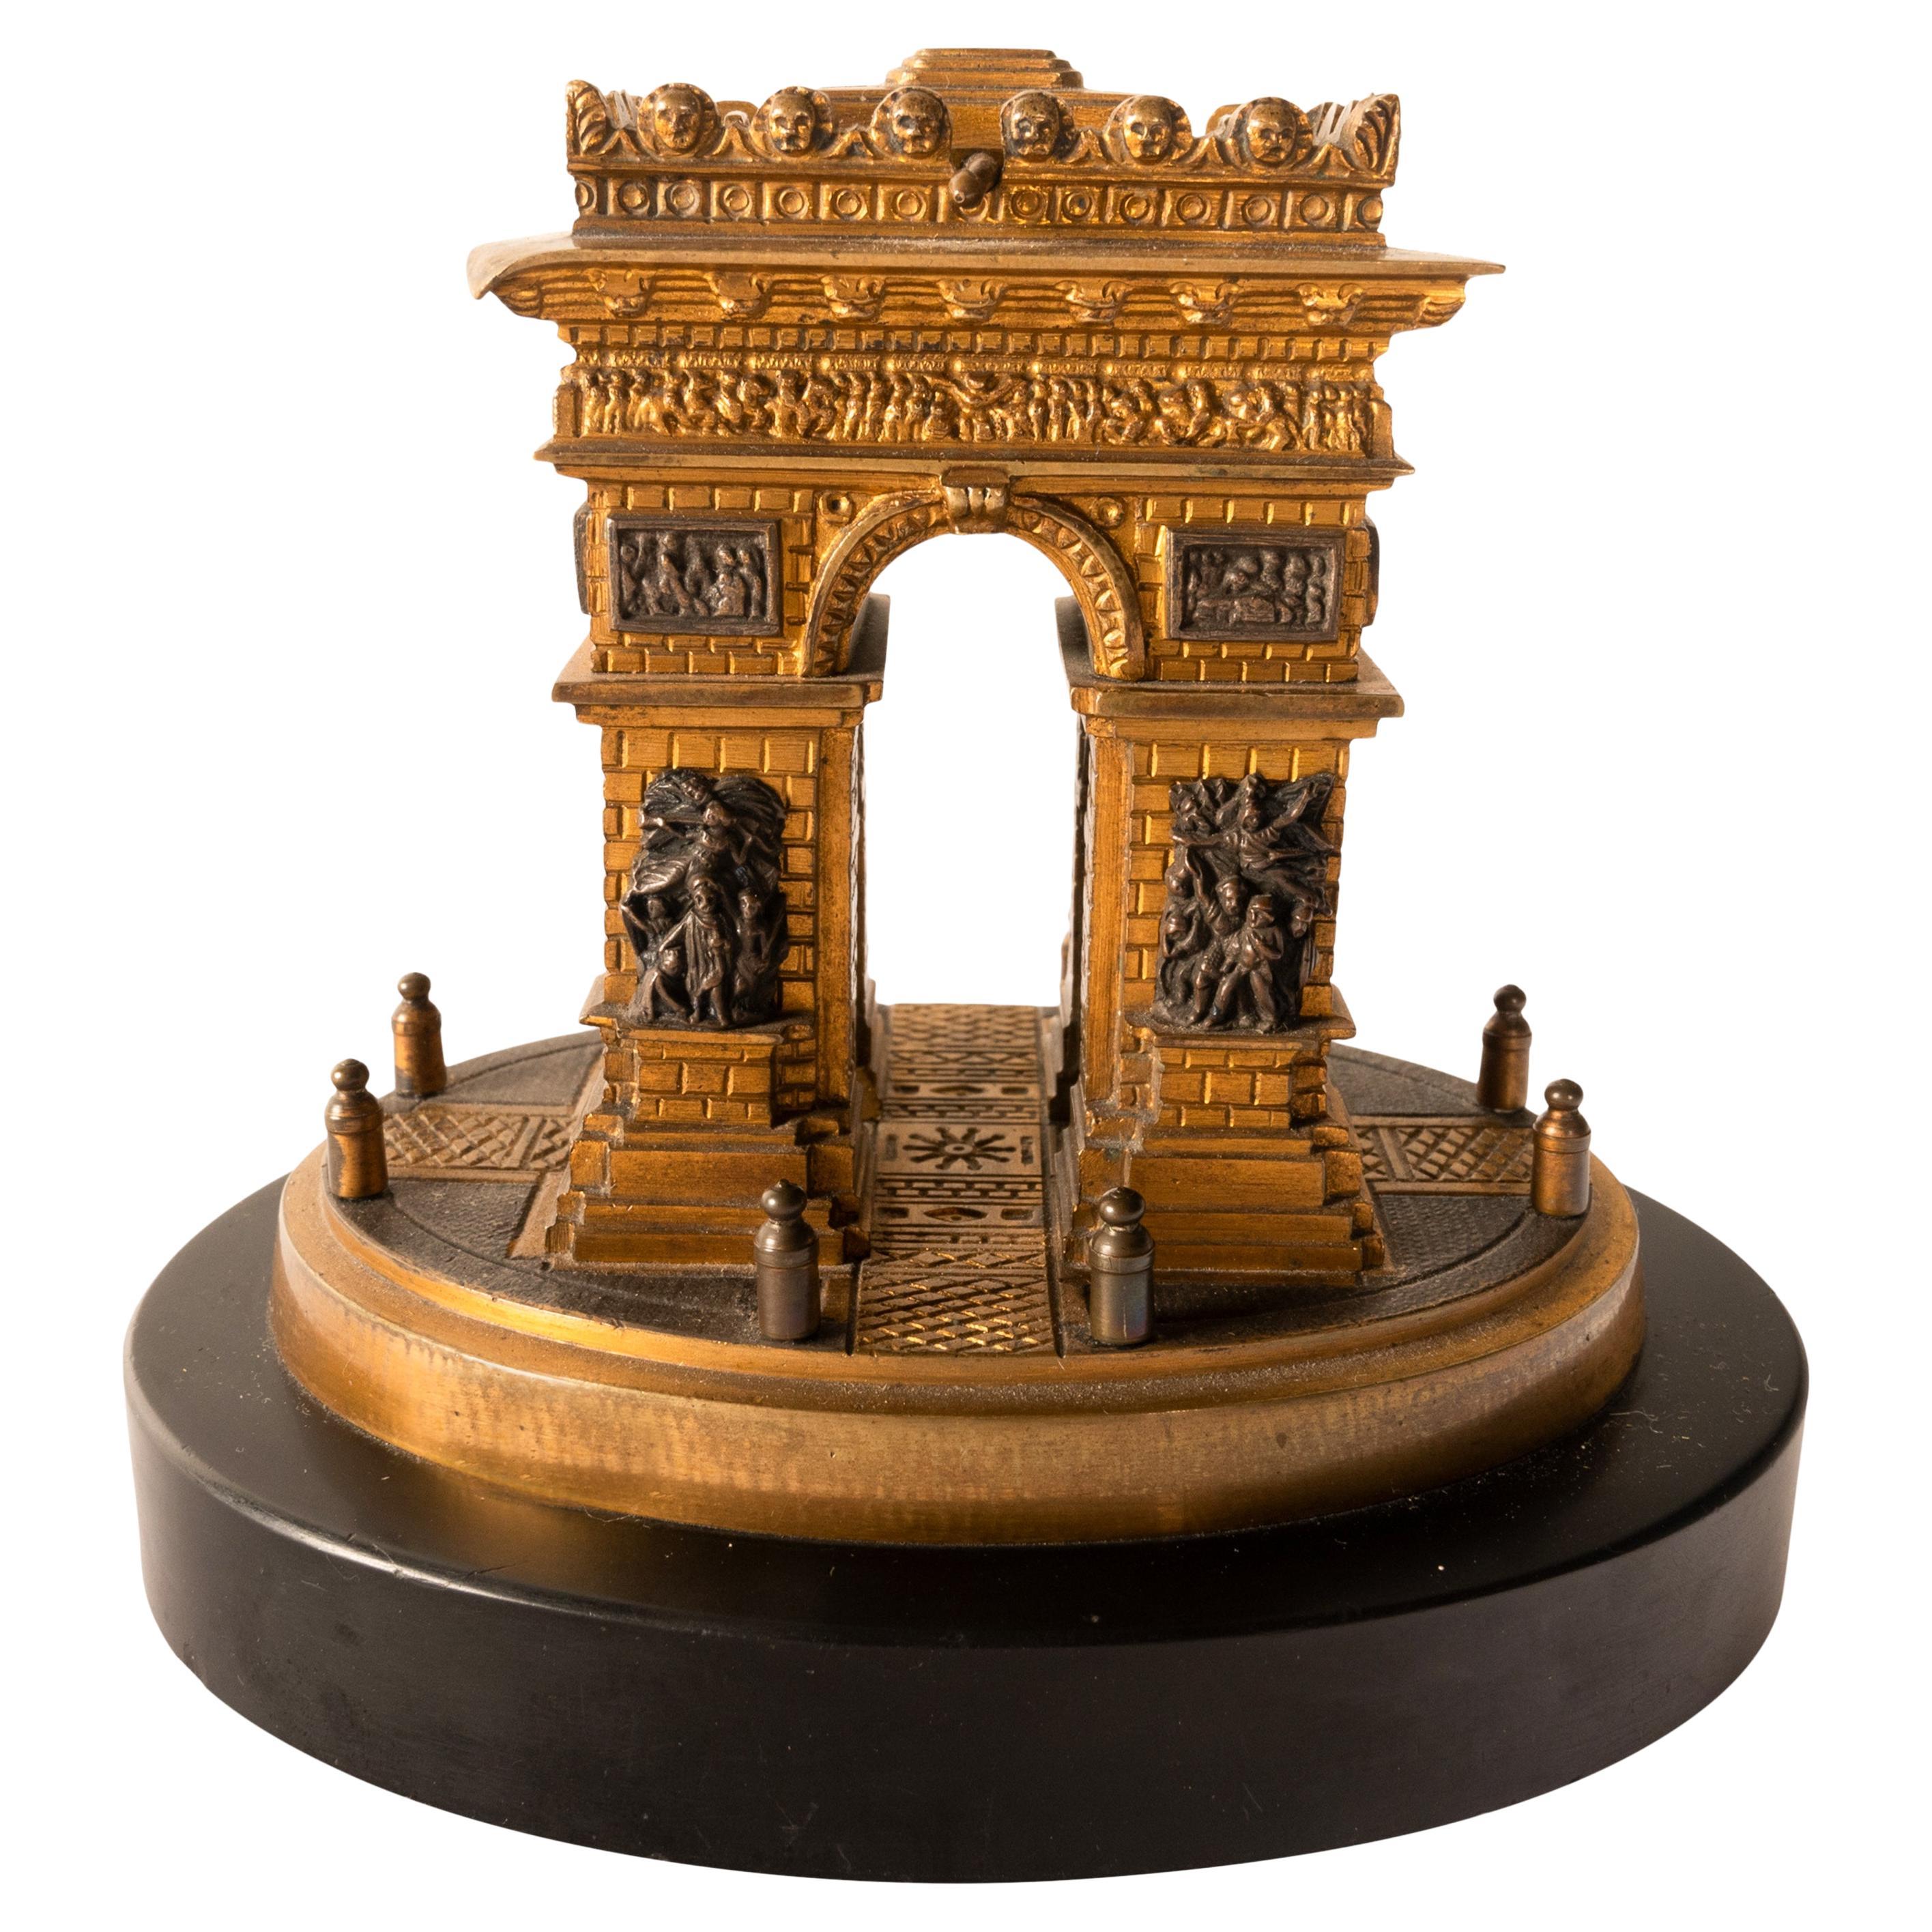 A fine early 19th century grand tour gilt bronze architectural model of the Arc de Triomphe, French, circa 1825.
This very fine grand tour model of one of France's most celebrated monuments, having  pediment with concealed hinged lid opening to a